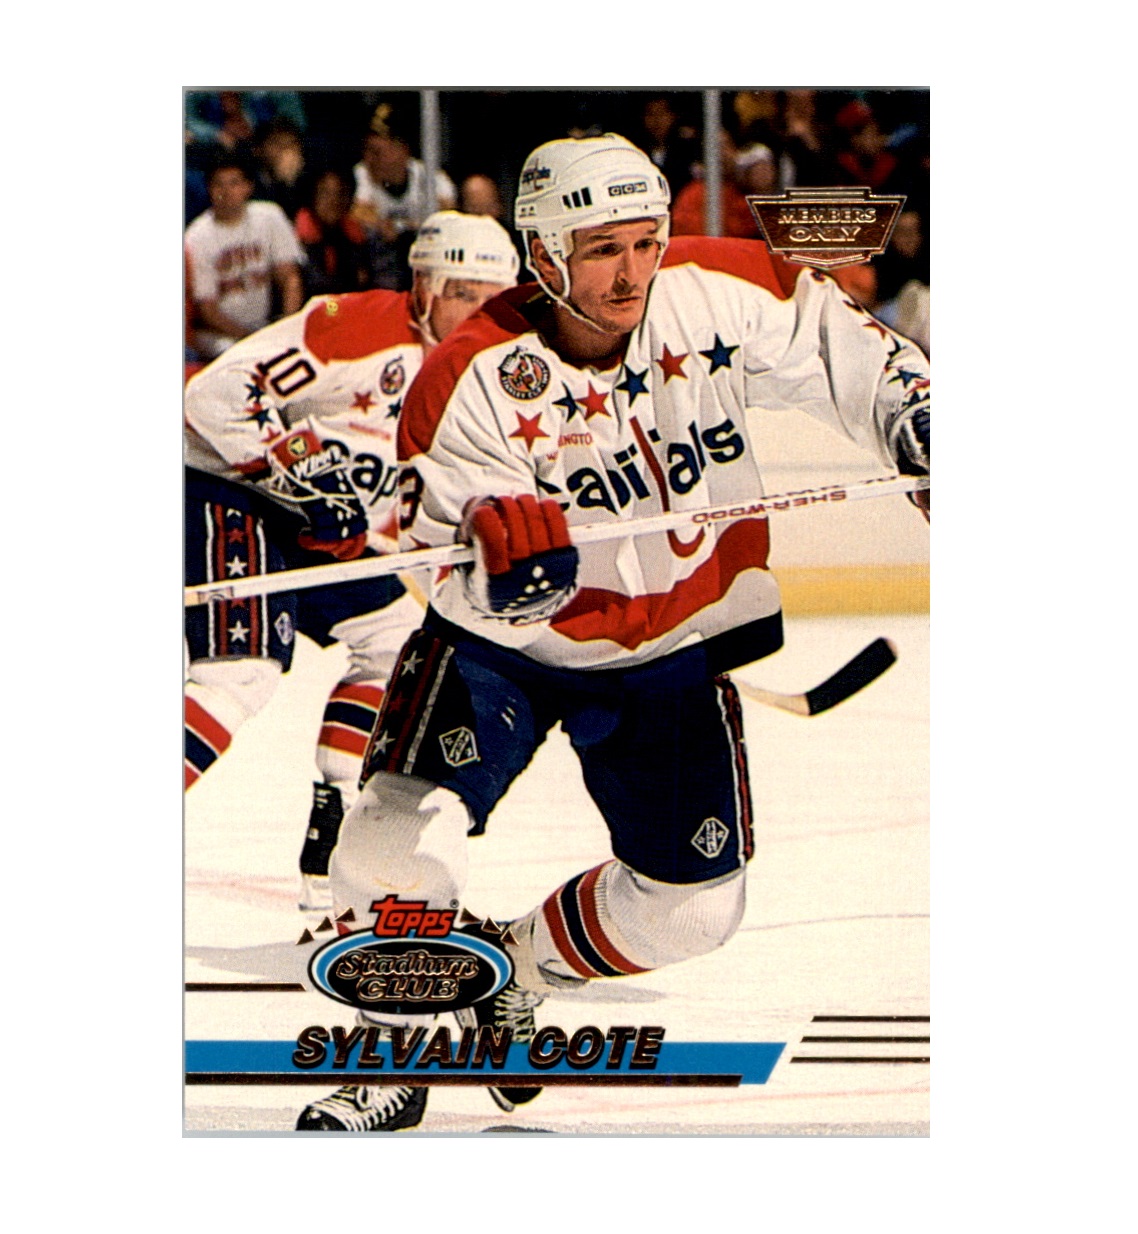 1993-94 Stadium Club Members Only Parallel #66 Sylvain Cote (10-X31-CAPITALS)